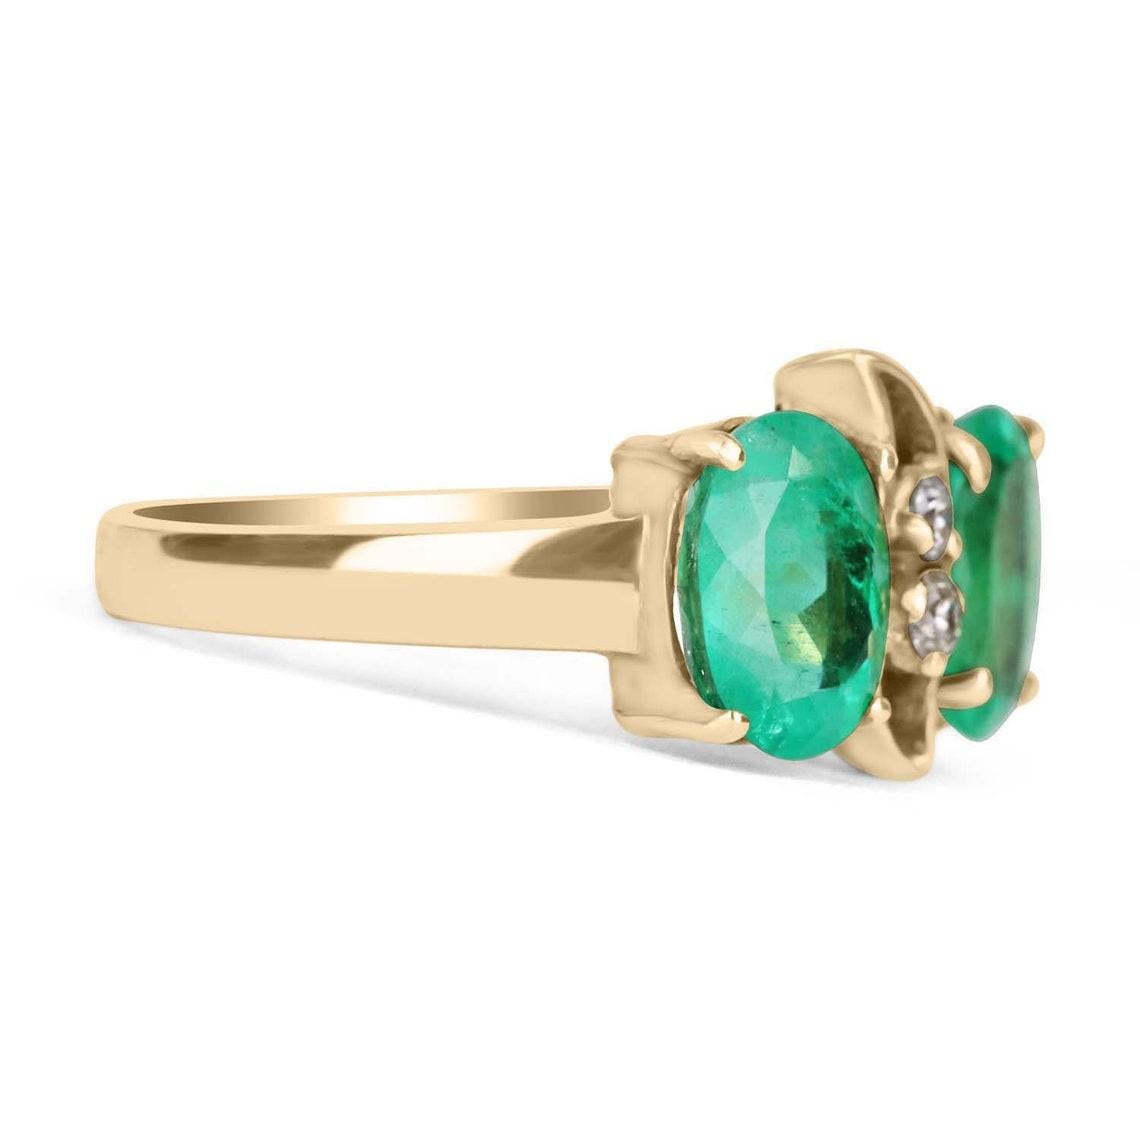 A double oval Colombian emerald & diamond ring in solid 18K yellow gold. Two, medium-green natural emeralds are used in this unique dual setting. The gemstones have the same beautiful color and similar eye clarity. No two emeralds are alike and this